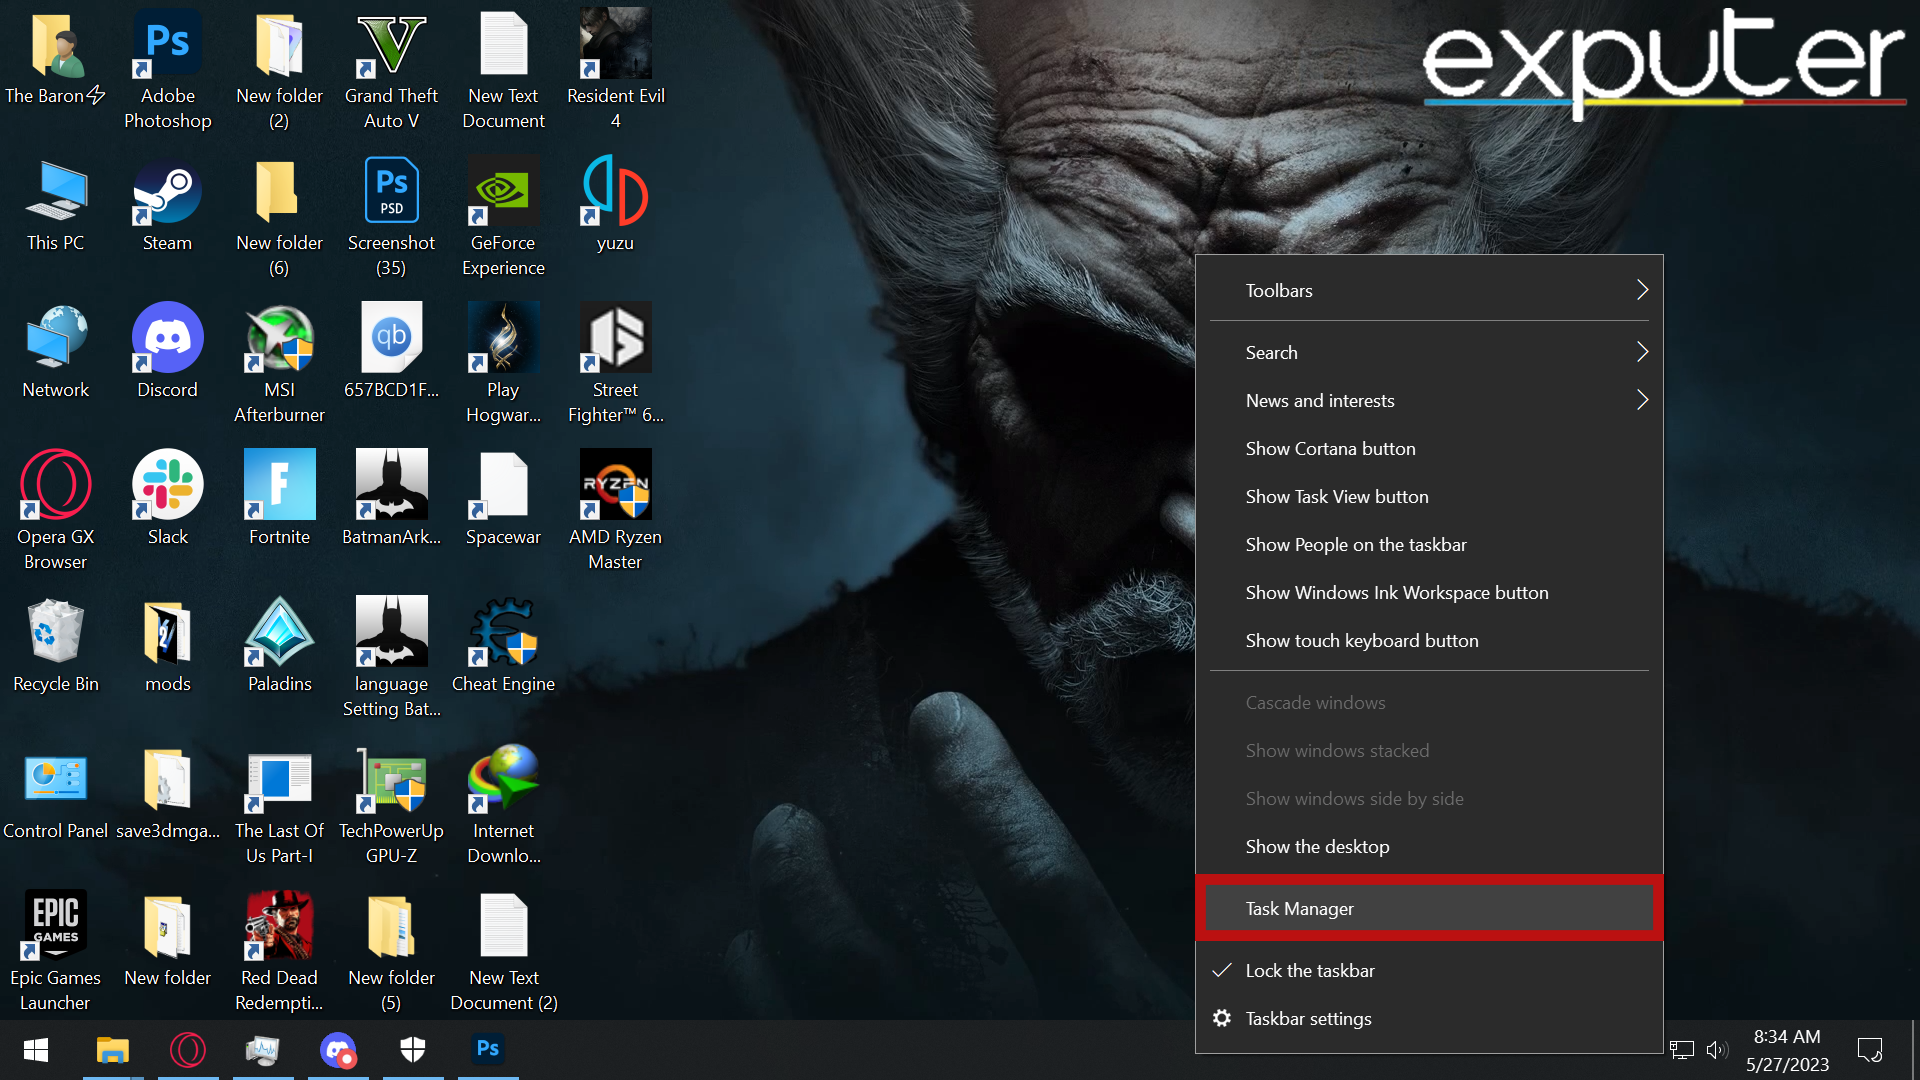 Opening the Task Manager by Right-Clicking the Taskbar. (image taken by eXputer)